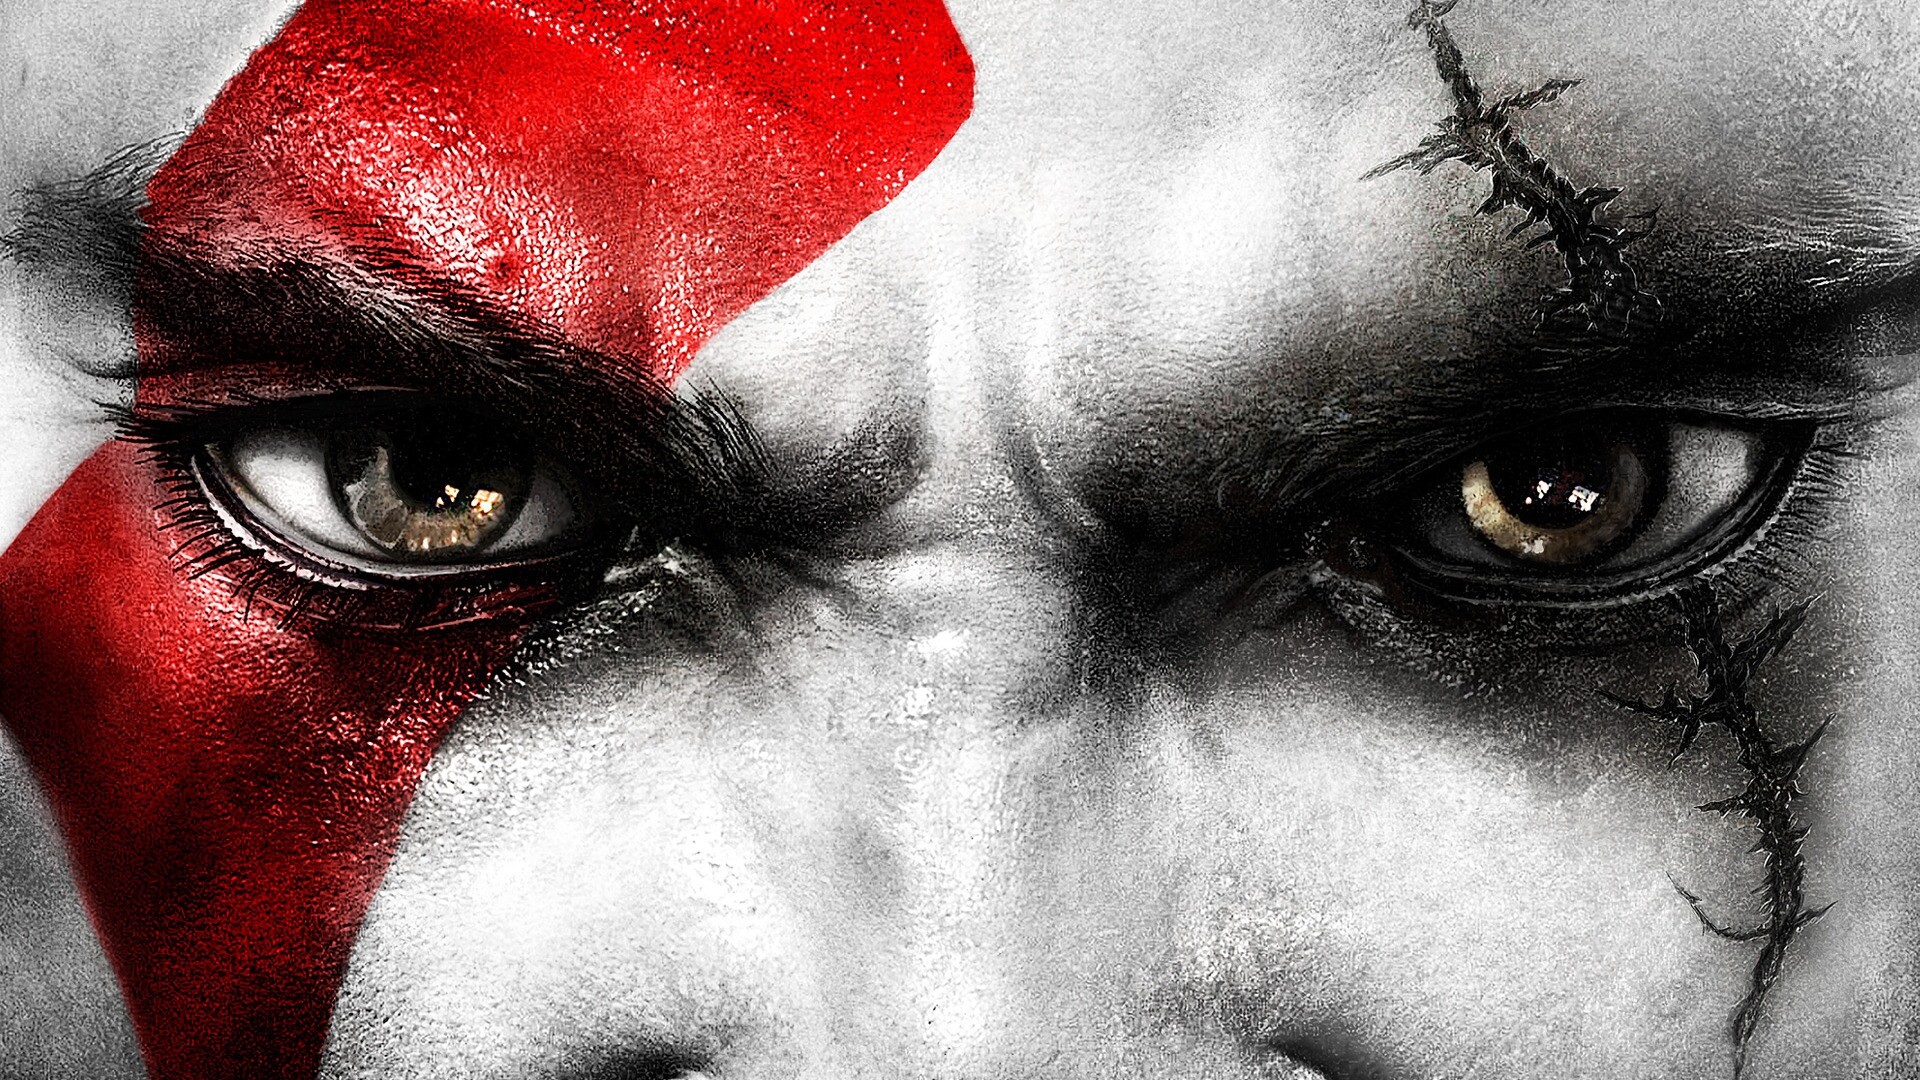 God of War: The character has been well received by critics and has become a video game icon, a relative newcomer among more established franchise characters, such as Mario, Link, Sonic the Hedgehog, and Lara Croft, Kratos. 1920x1080 Full HD Background.